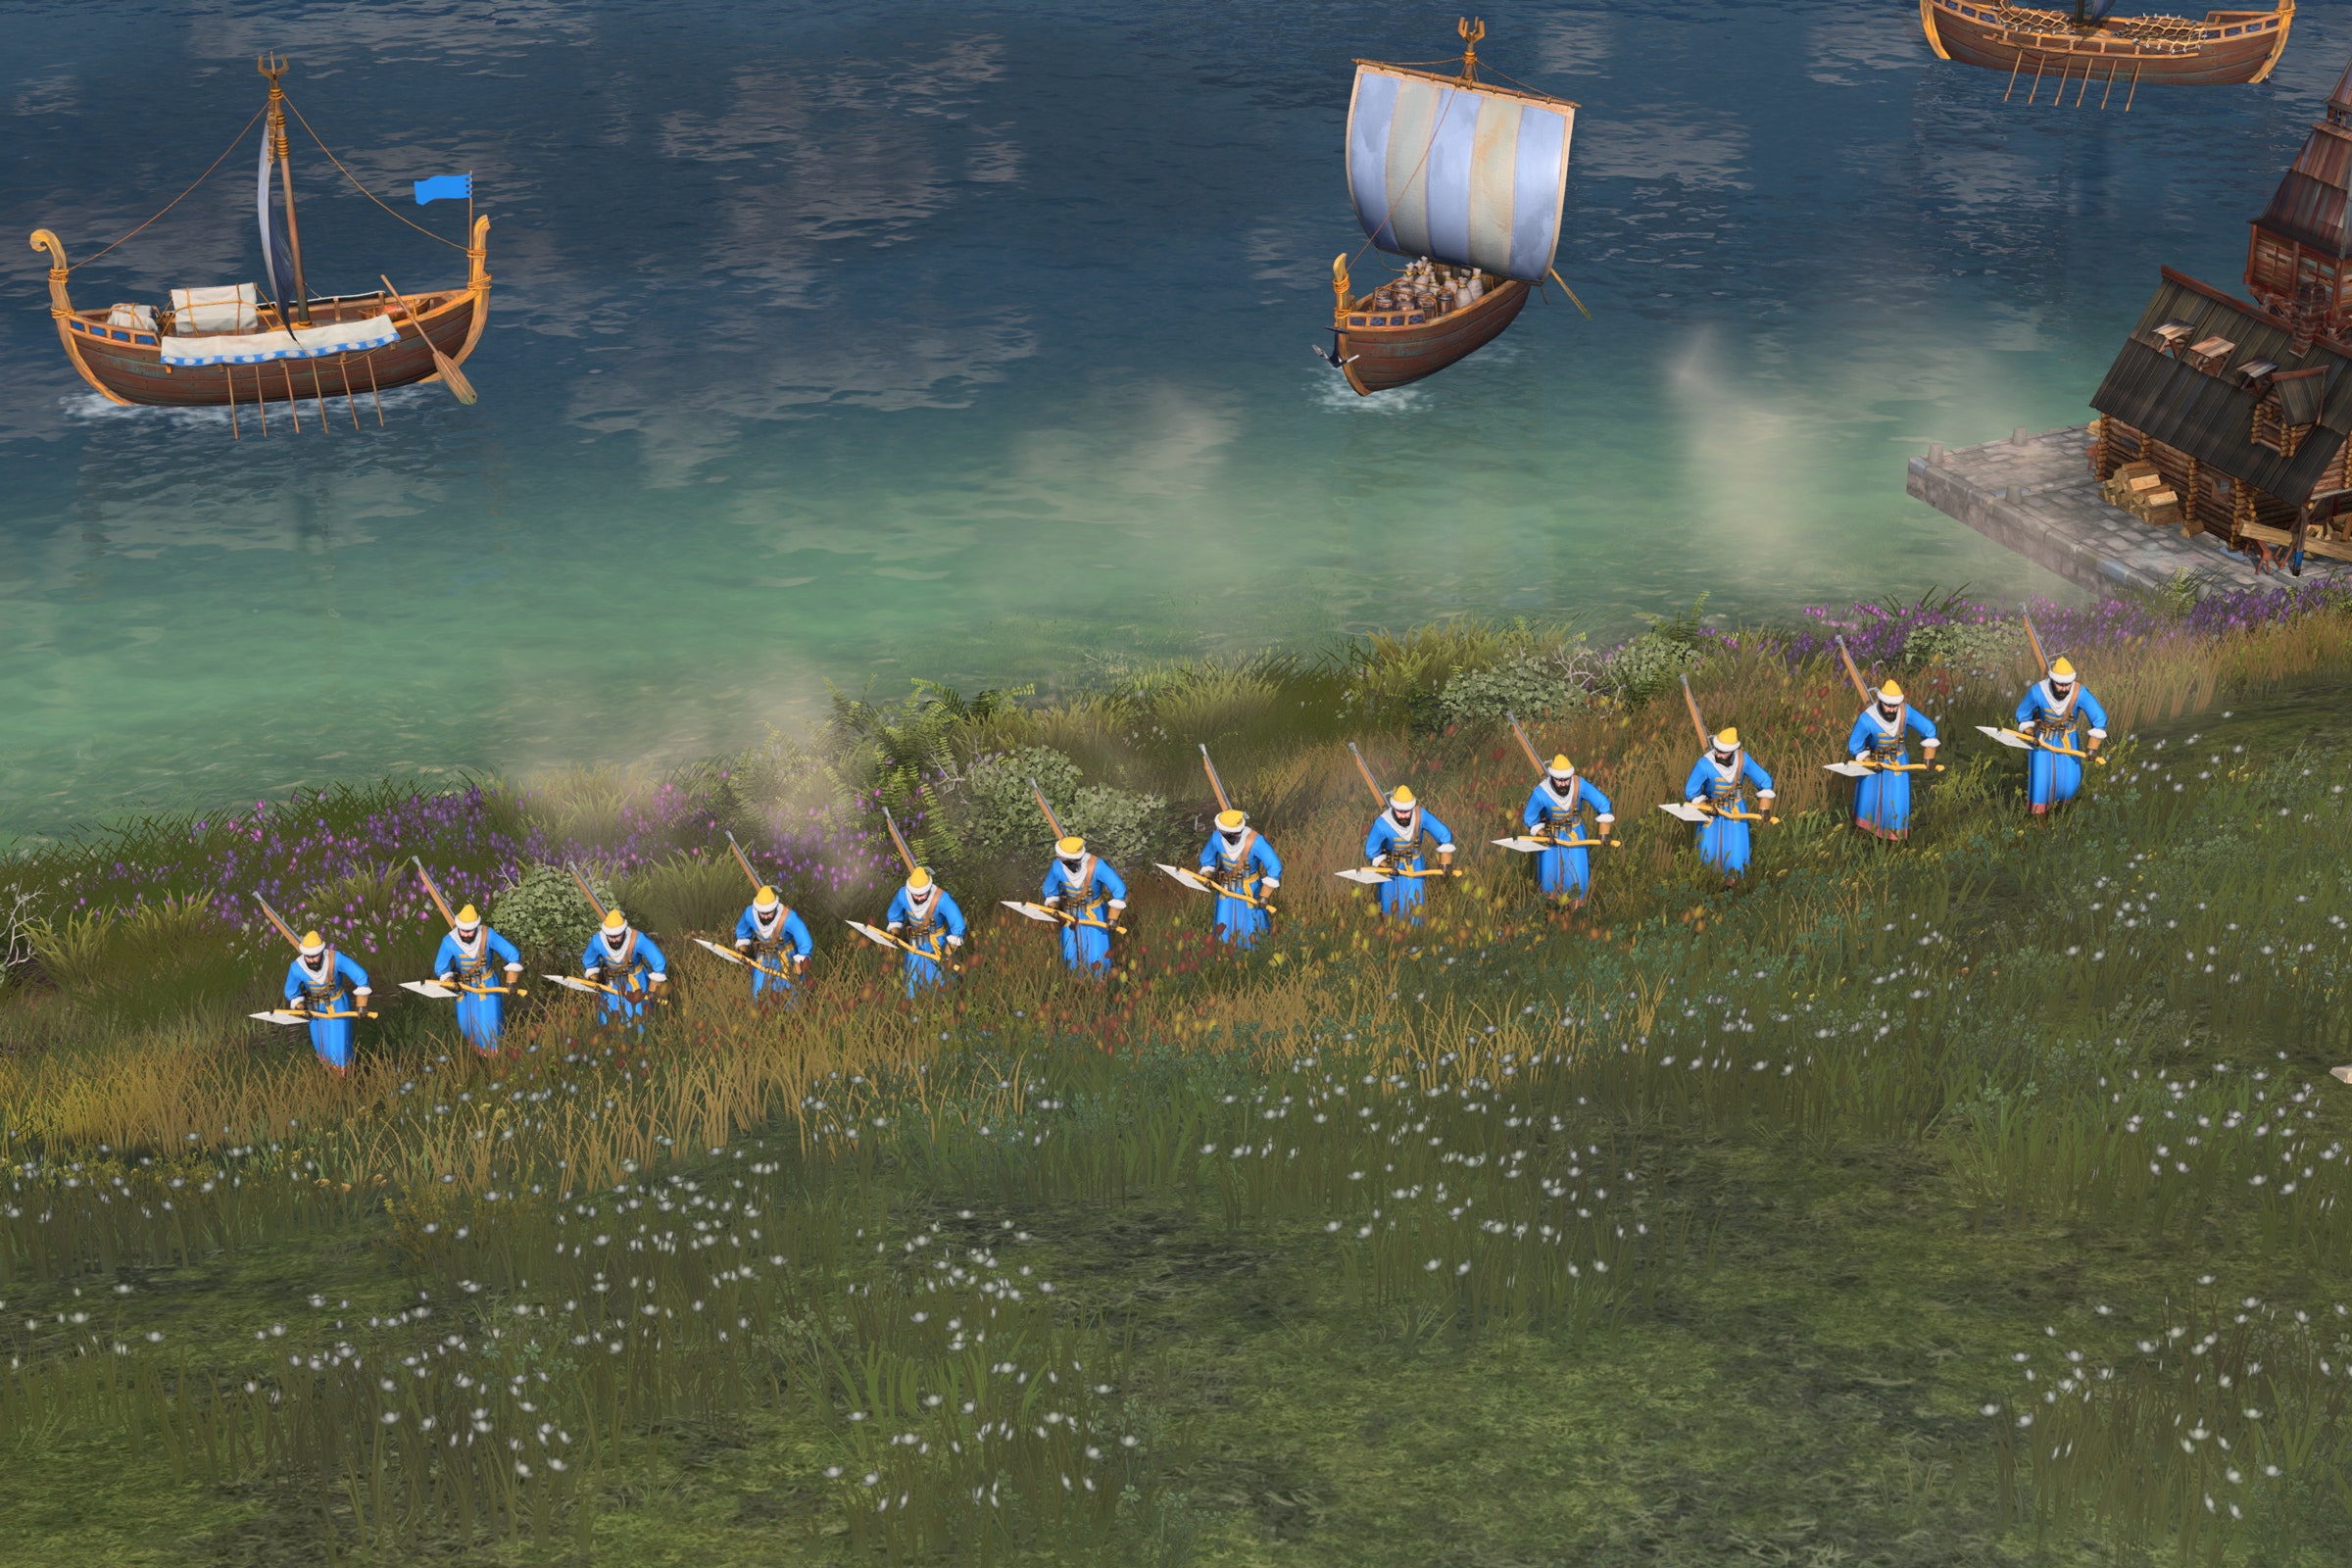 Age of Empires IV Is a Stable Plot Game Stuck in the Past